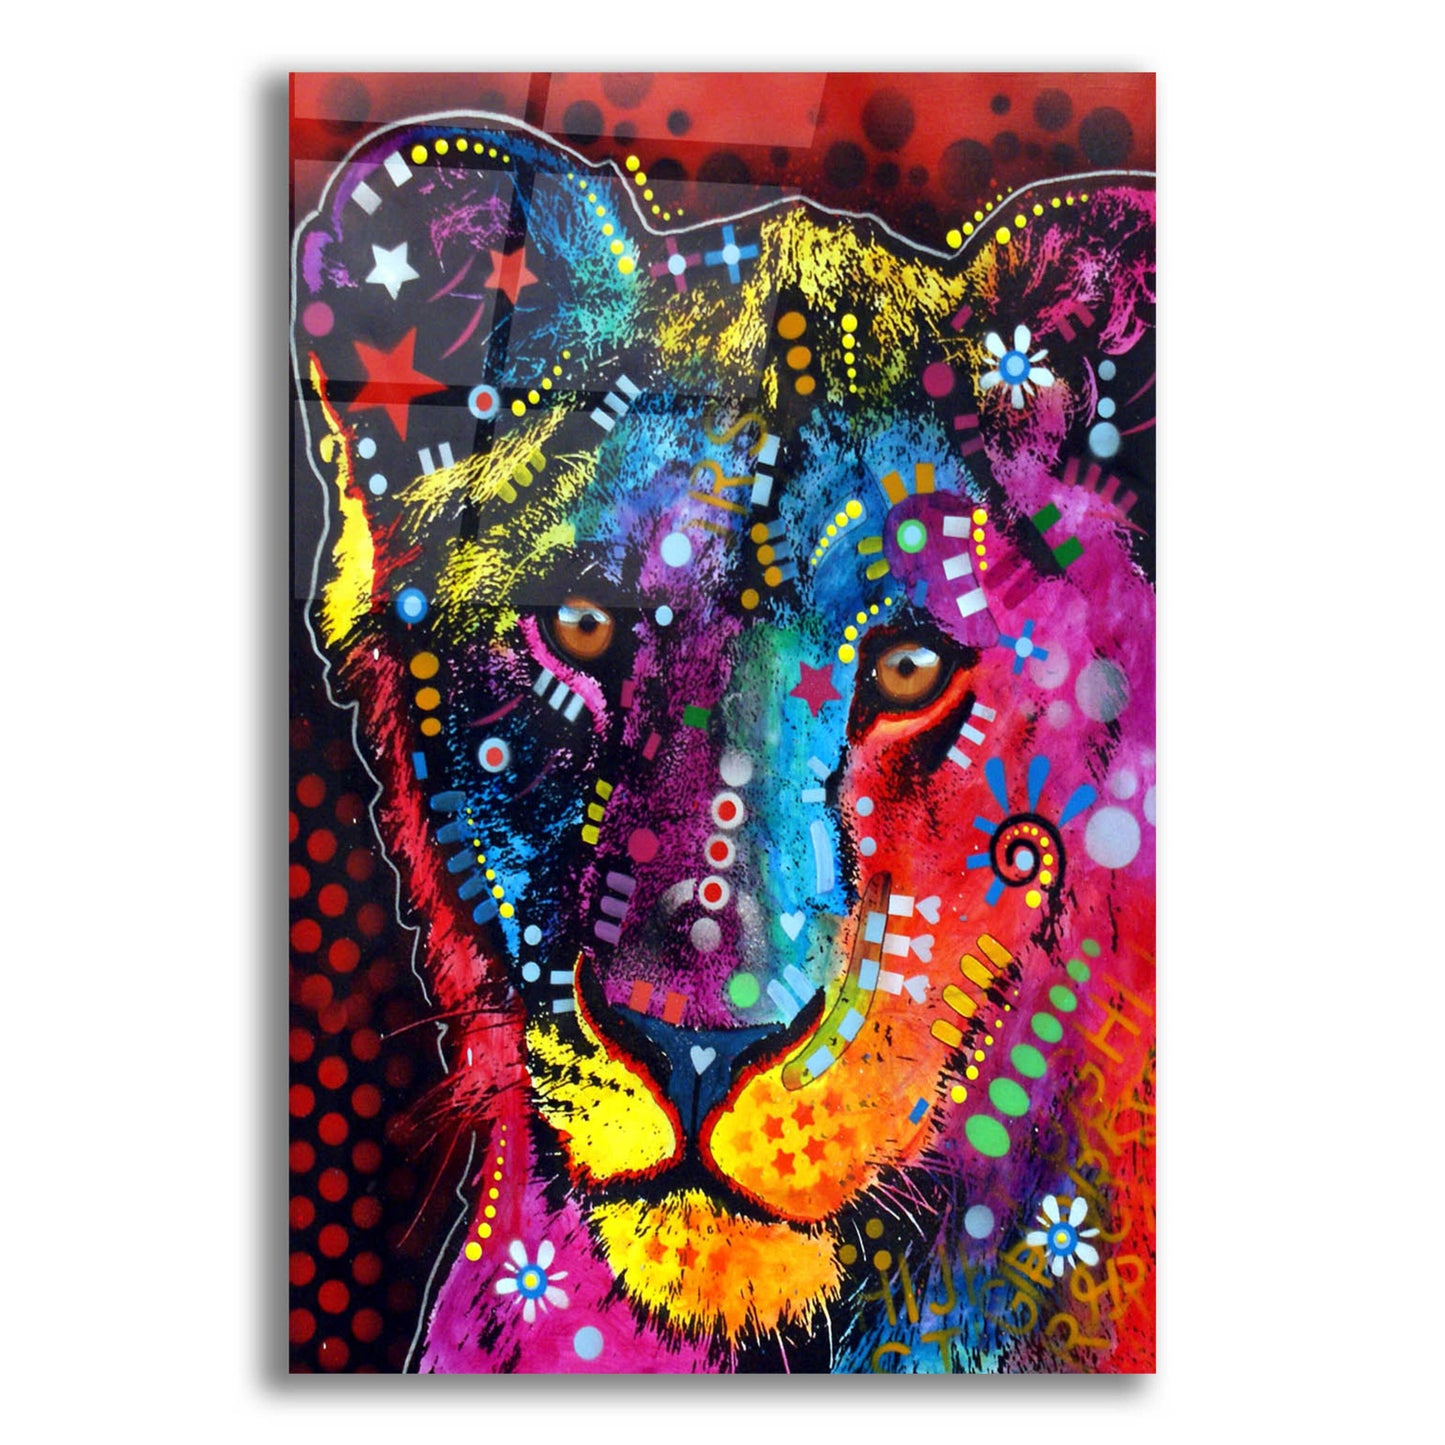 Epic Art 'Young Lion' by Dean Russo, Acrylic Glass Wall Art,16x24